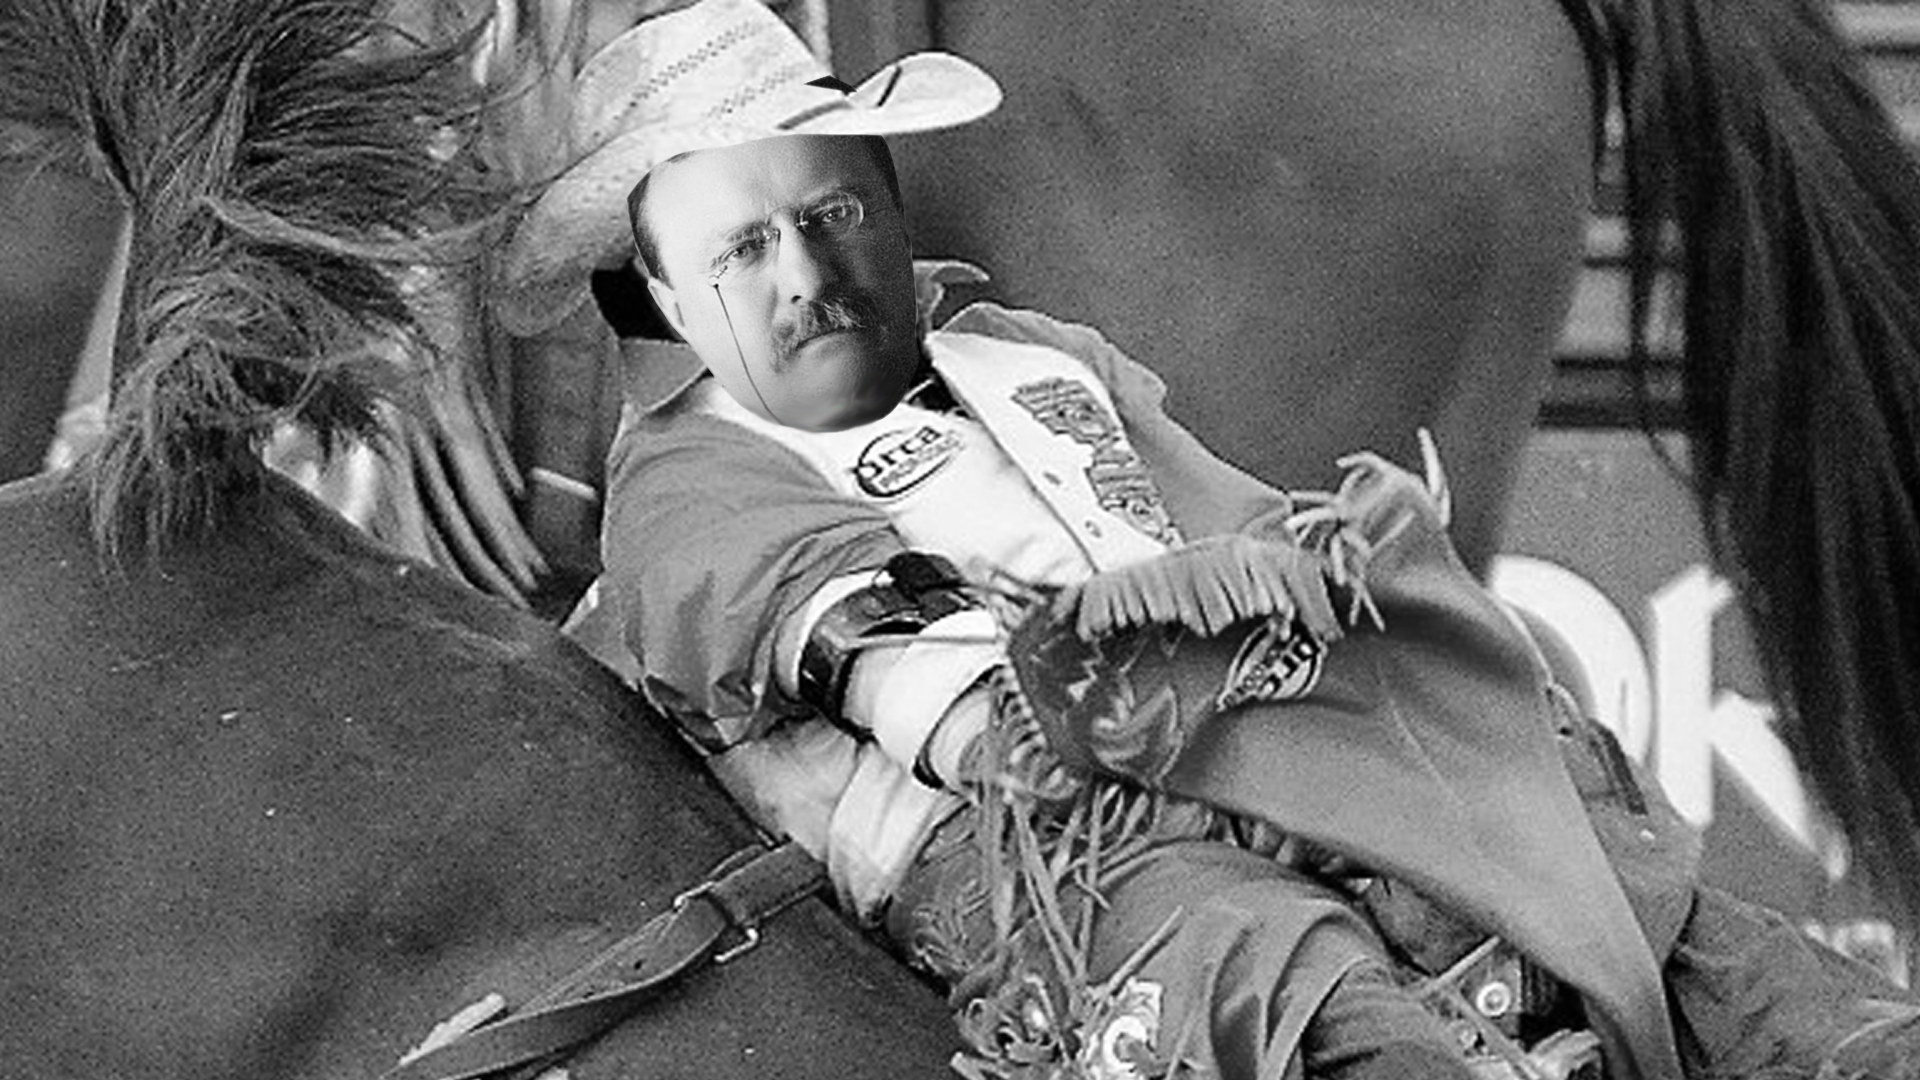 Teddy Roosevelt the Cowboy: After two sudden family deaths sent him spiraling into grief, President Roosevelt headed out to his ranch in the Dakota Territories. While there, he spent his days doing what cowboys in the 1880s did – hunting game, riding broncos and catching outlaws.  Source: http://www.whitehouse.gov/about/presidents/theodoreroosevelt